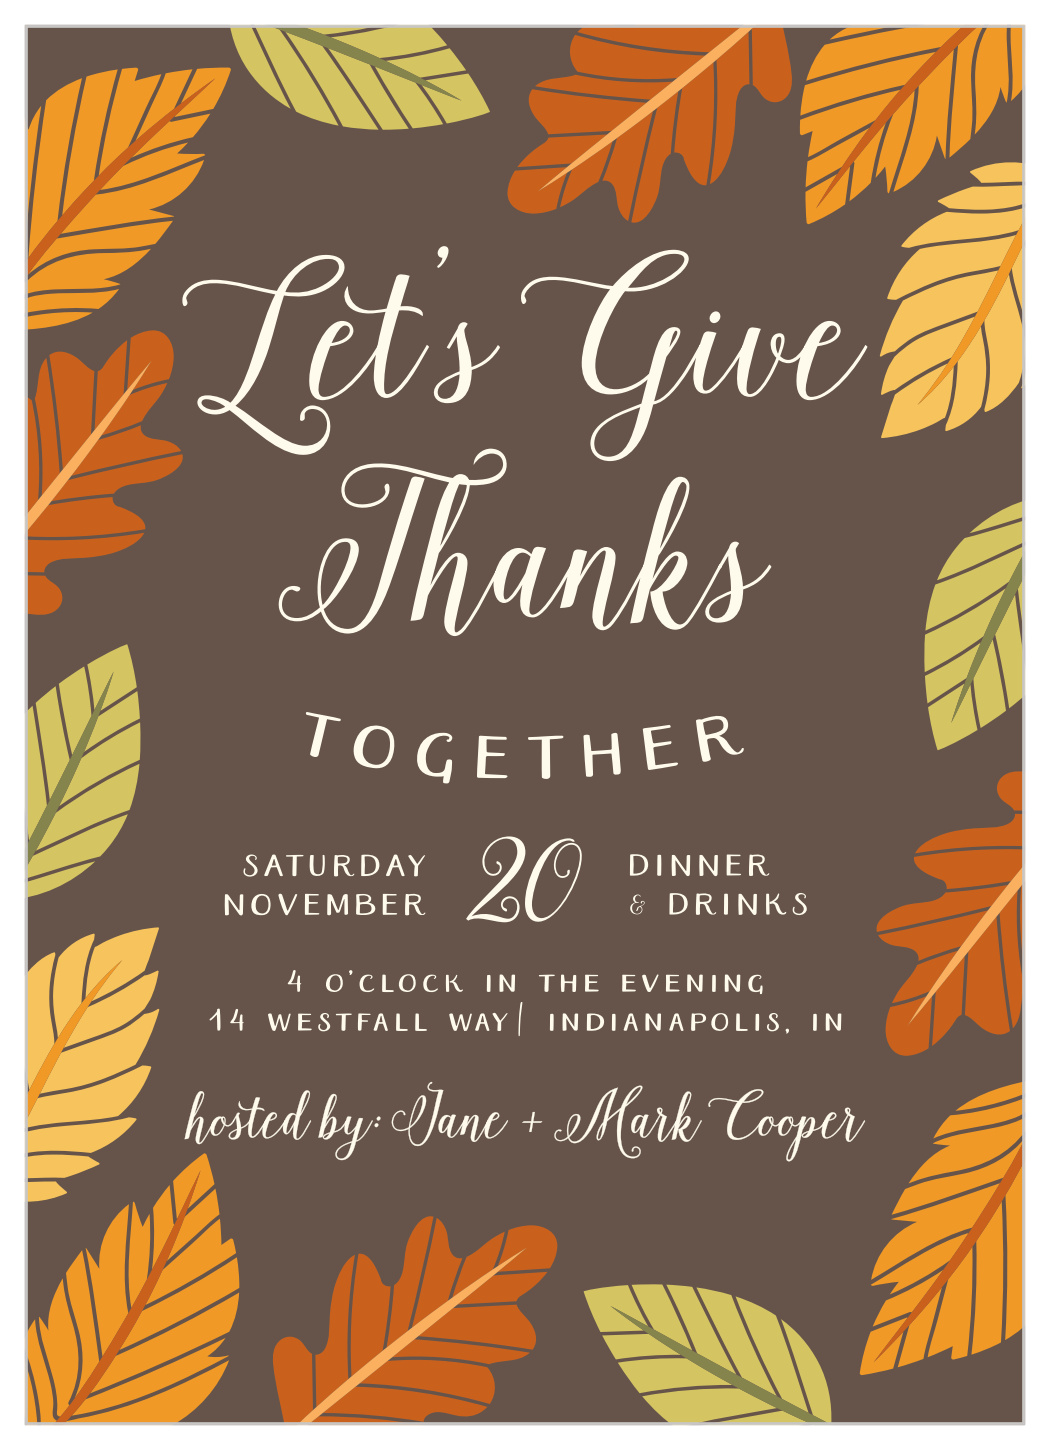 gratefully-together-thanksgiving-invitations-by-basic-invite